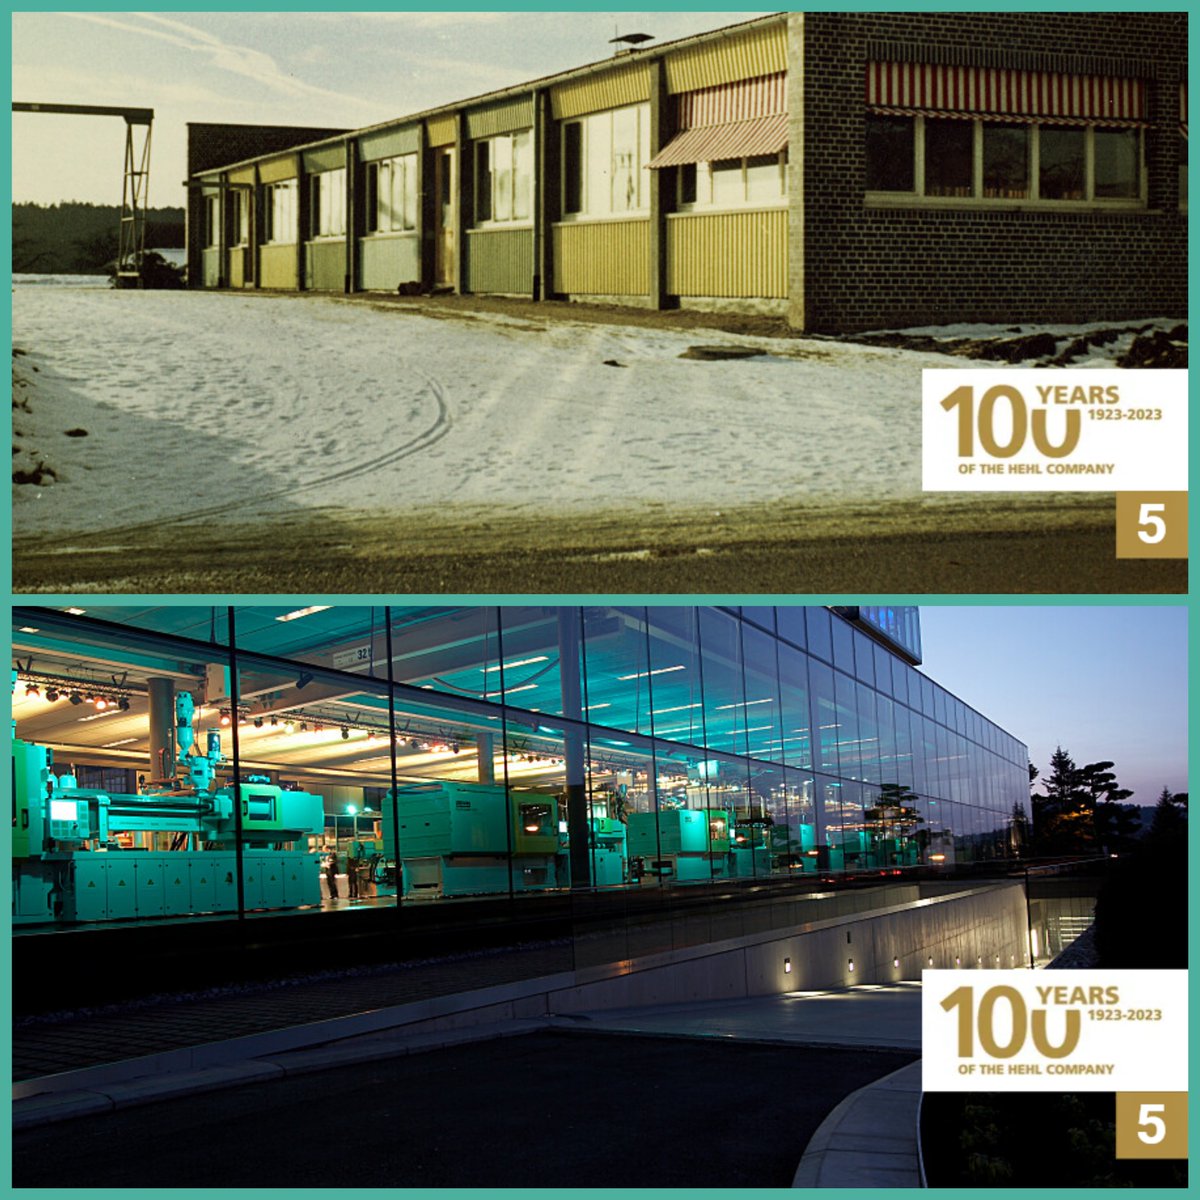 Over the years, we've grown and the buildings have also changed! The place where our Customer Center stands today, was the site of our company building in the 1950s. The 'Duo Lux' lettering on the building indicates that we were still mainly manufacturing flashguns at that time.